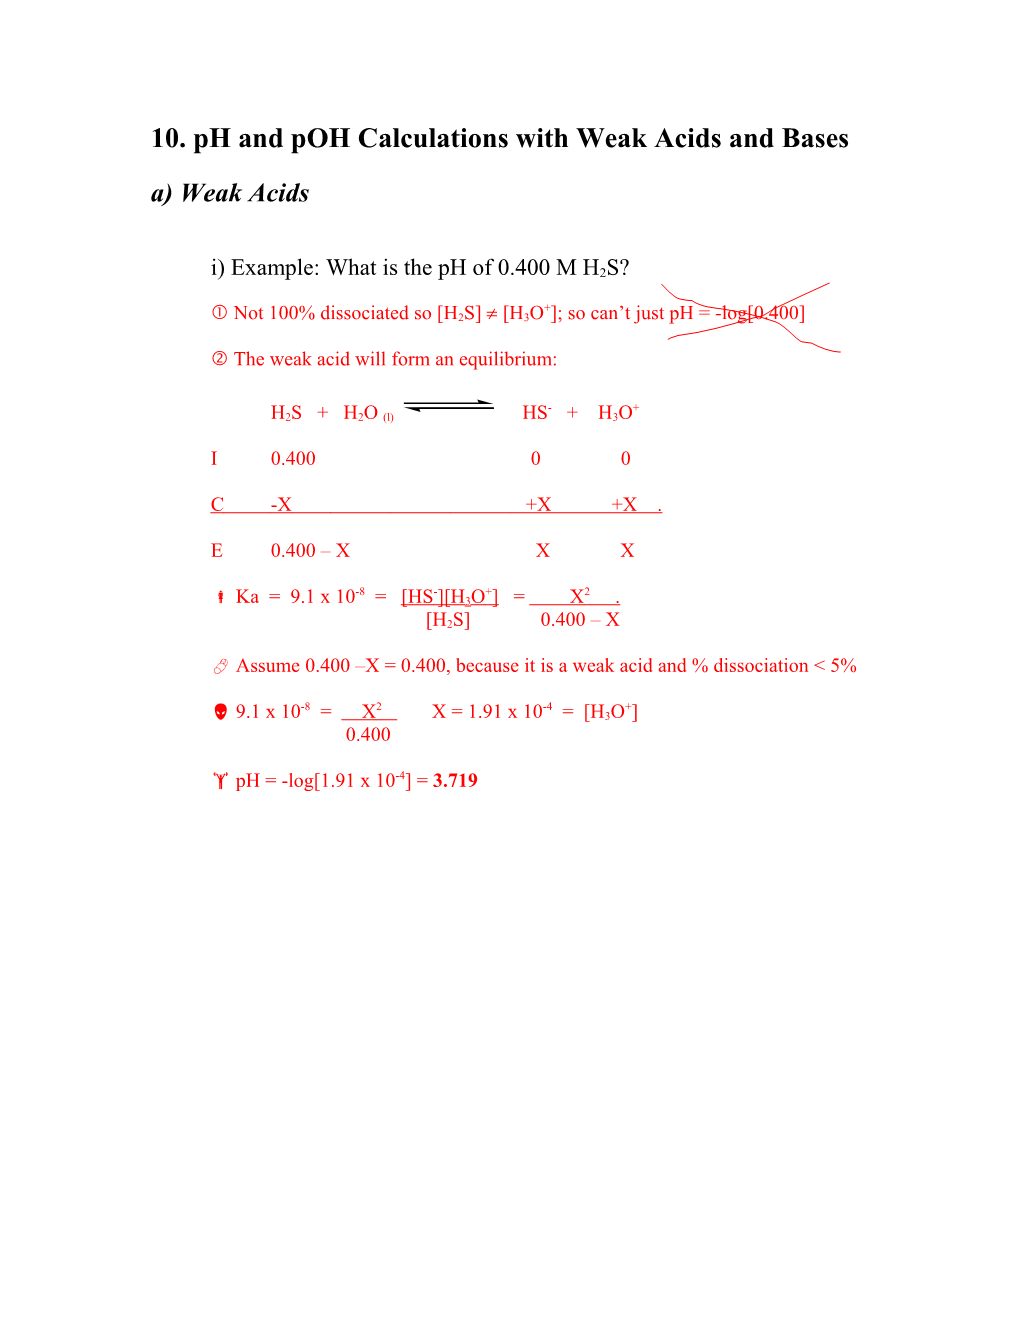 10. Ph and Poh Calculations with Weak Acids and Bases